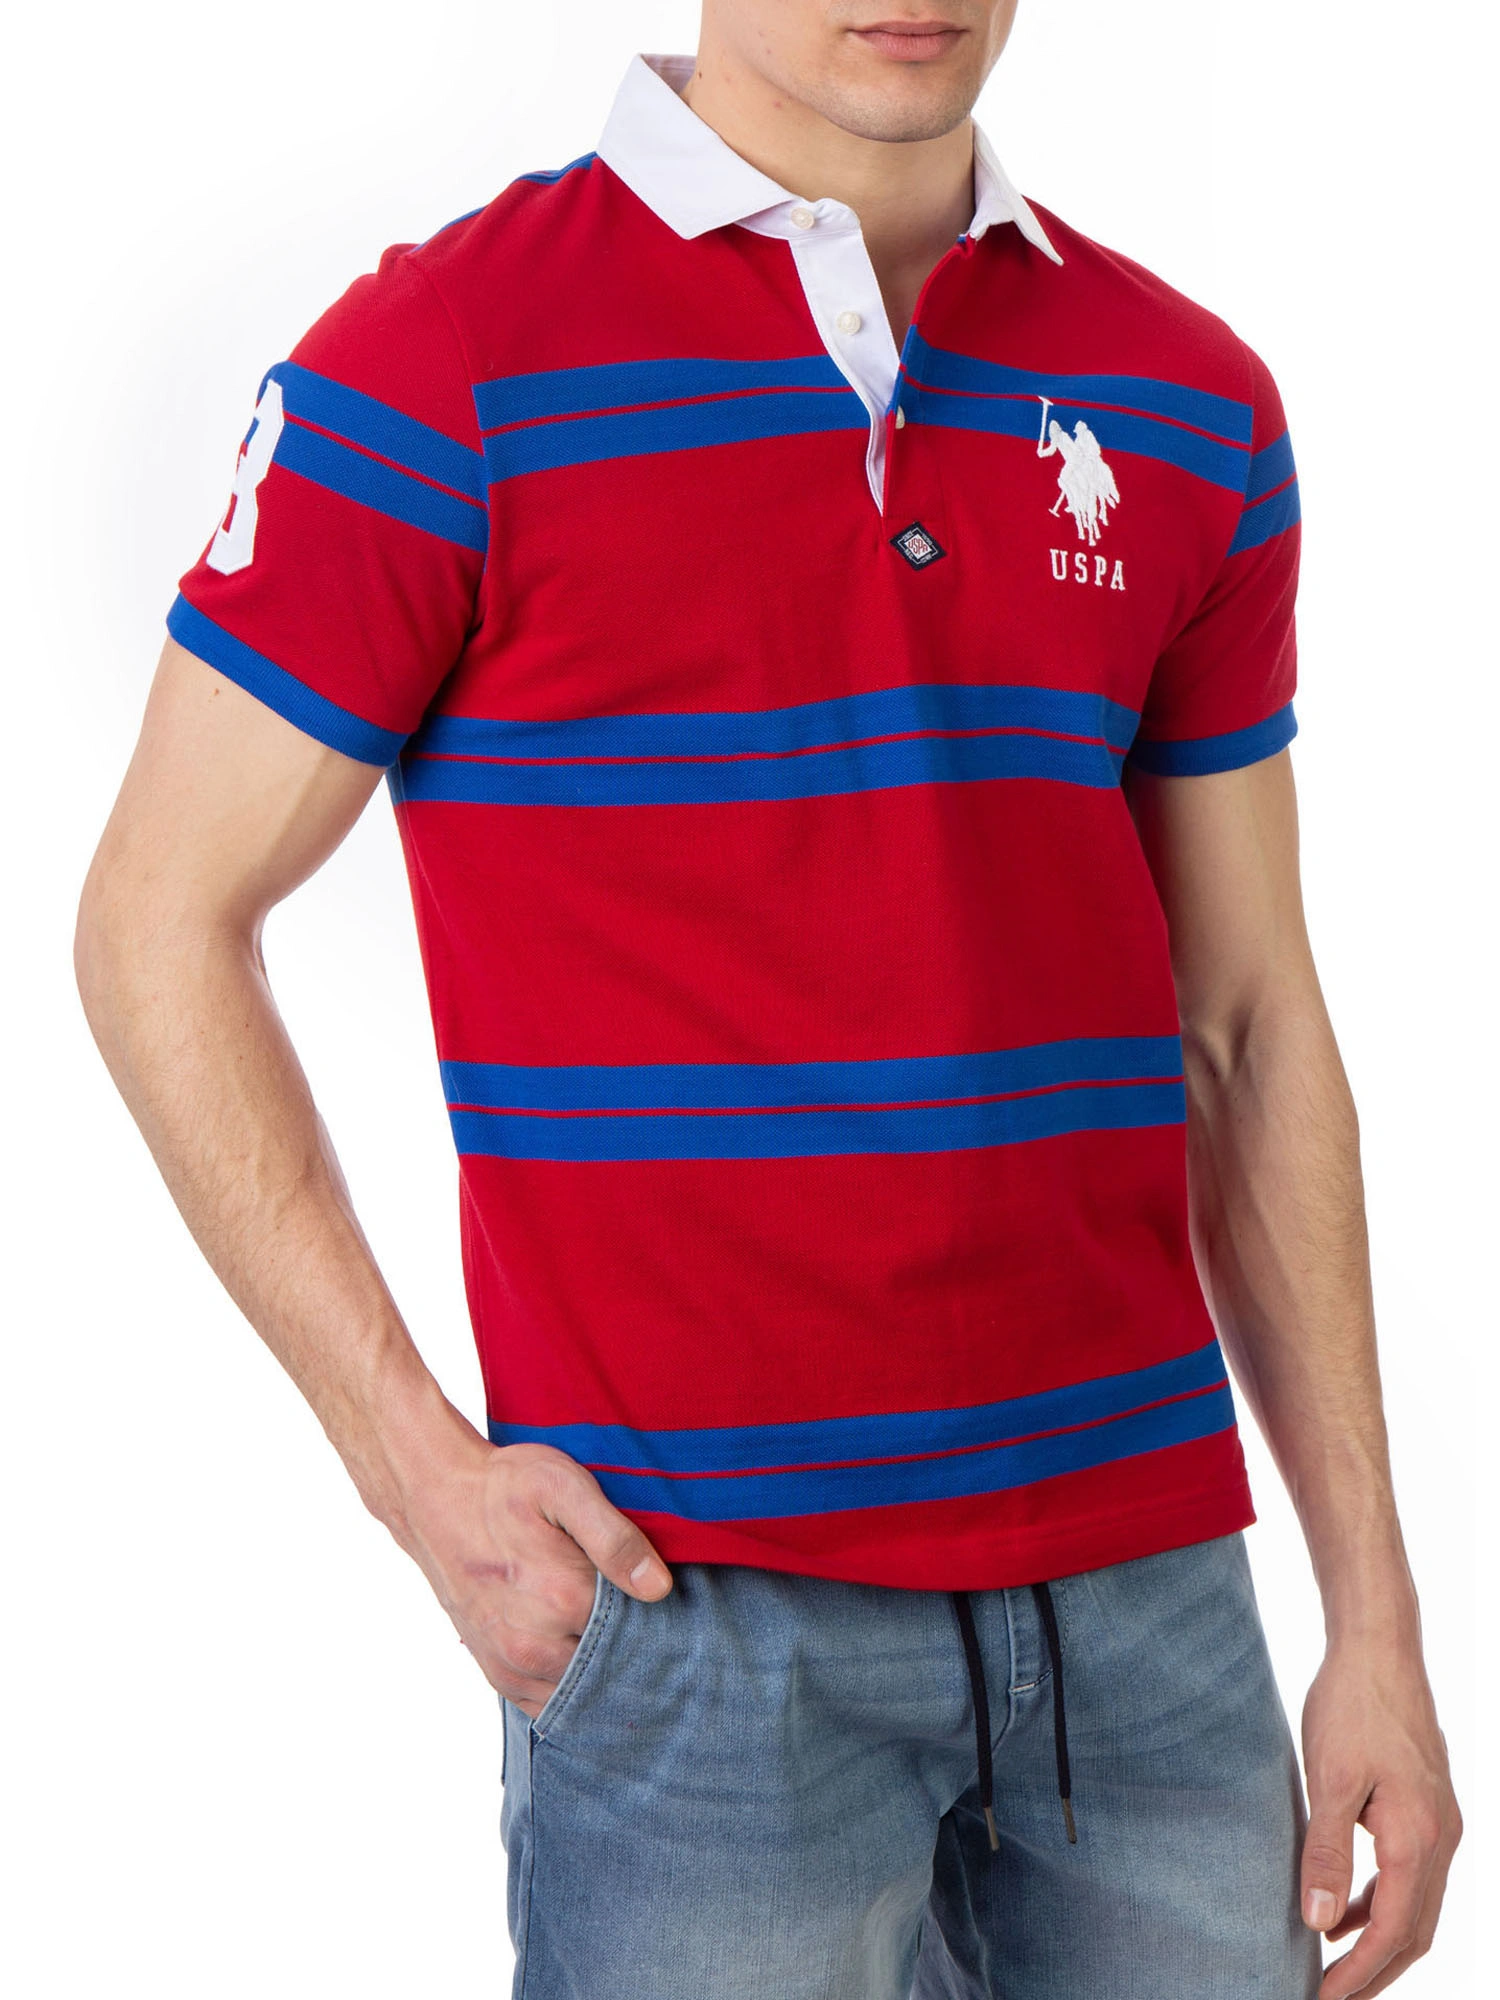 Wholesale Embroidery Polo Shirt Supplier In Norway